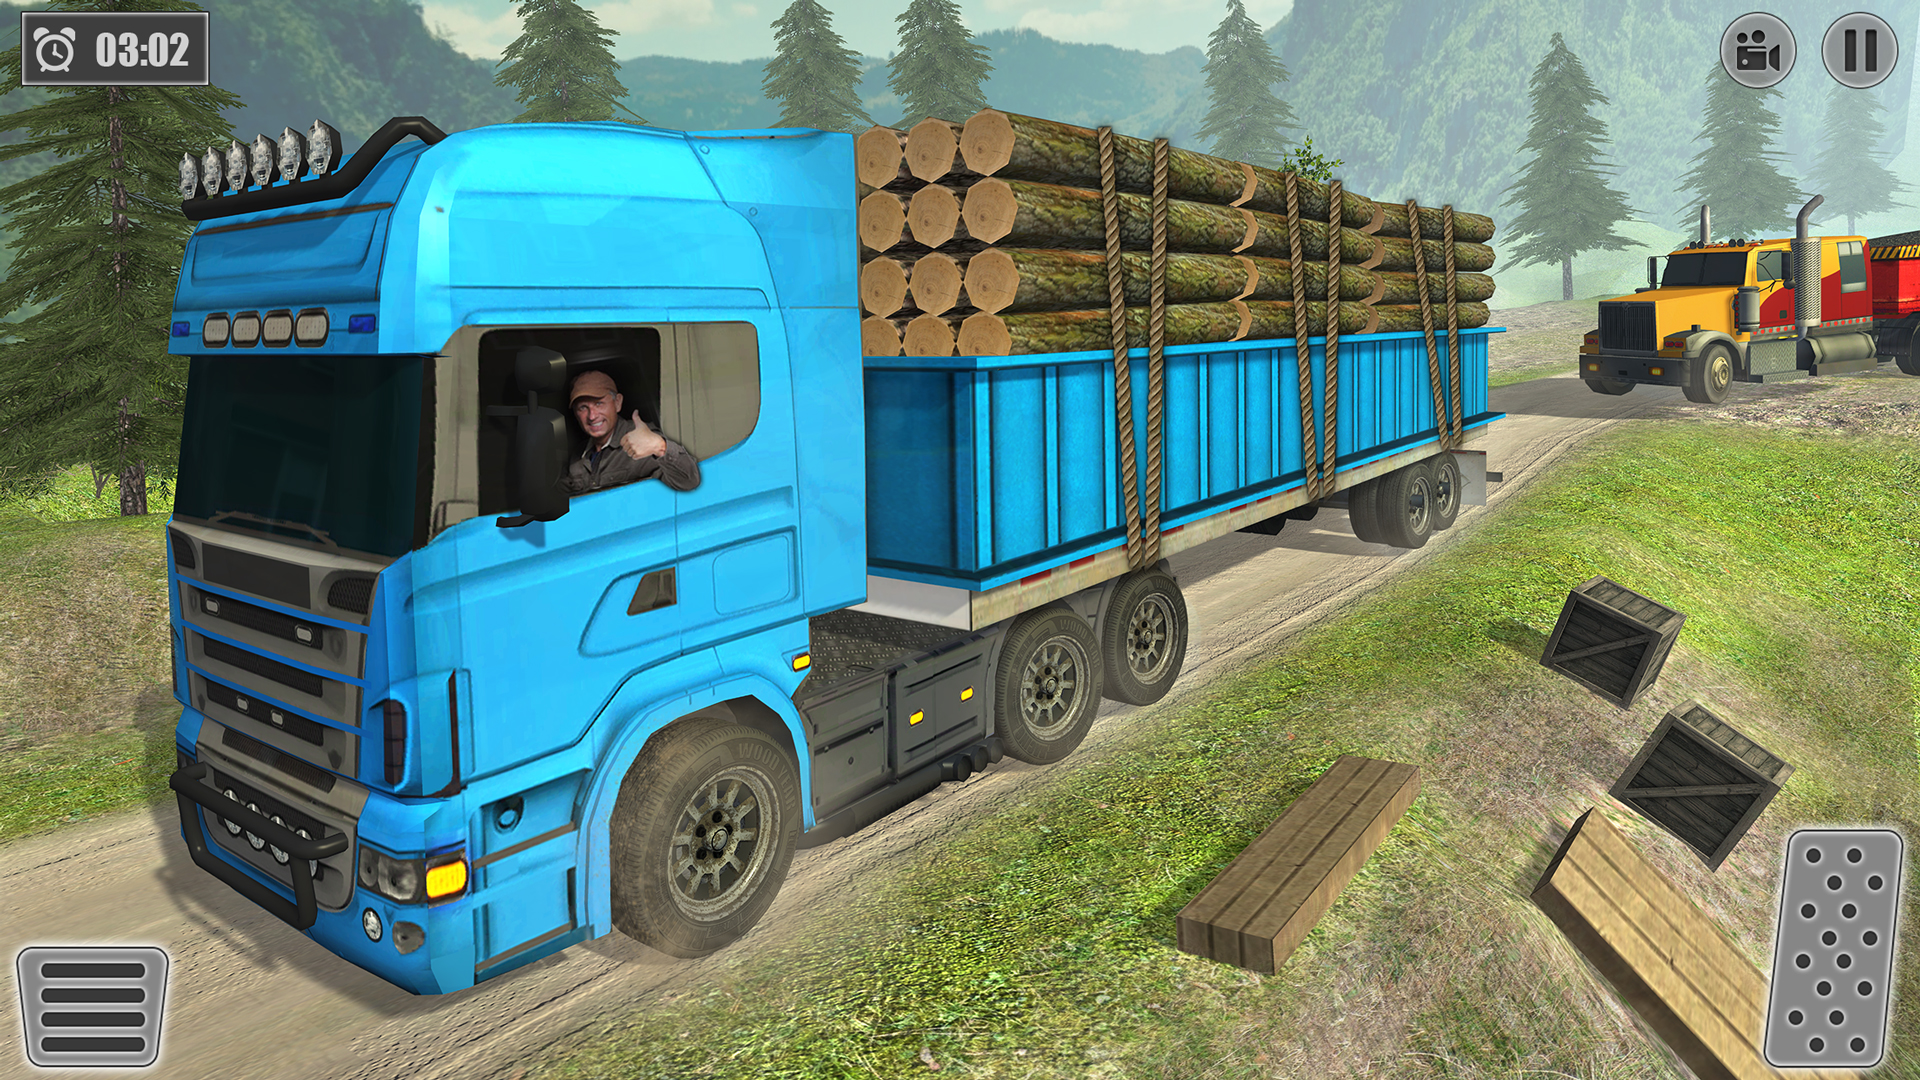 Uphill Truck: Offroad Games 3D - Android game screenshots.